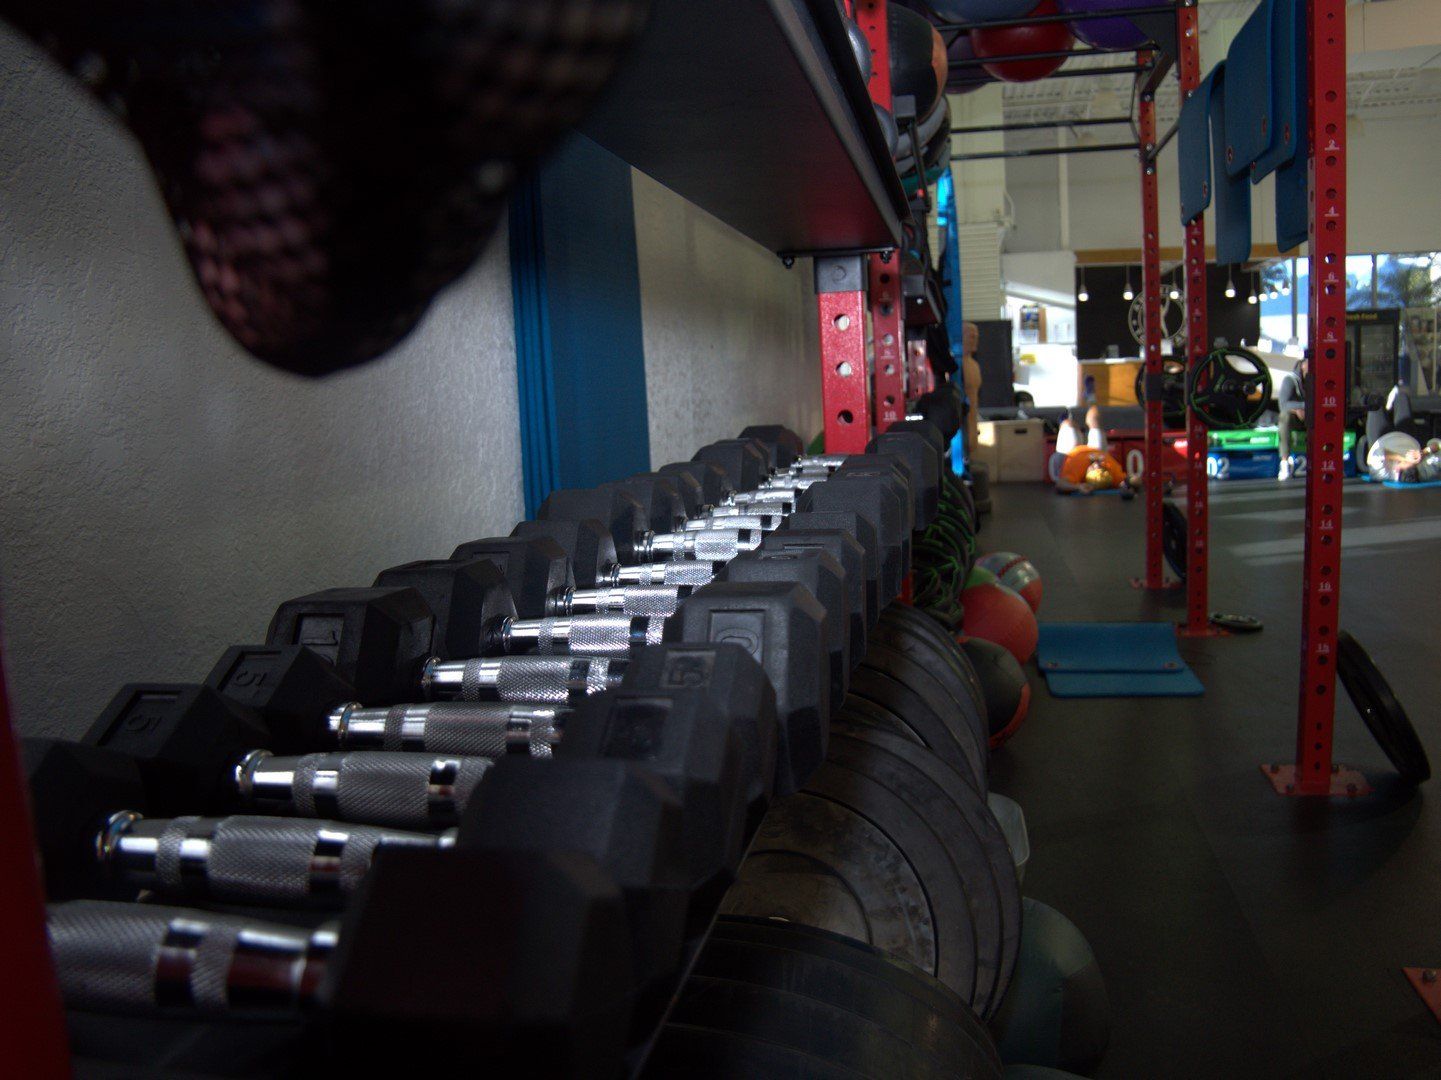 Weights and workout equipment at Aventura/NMB